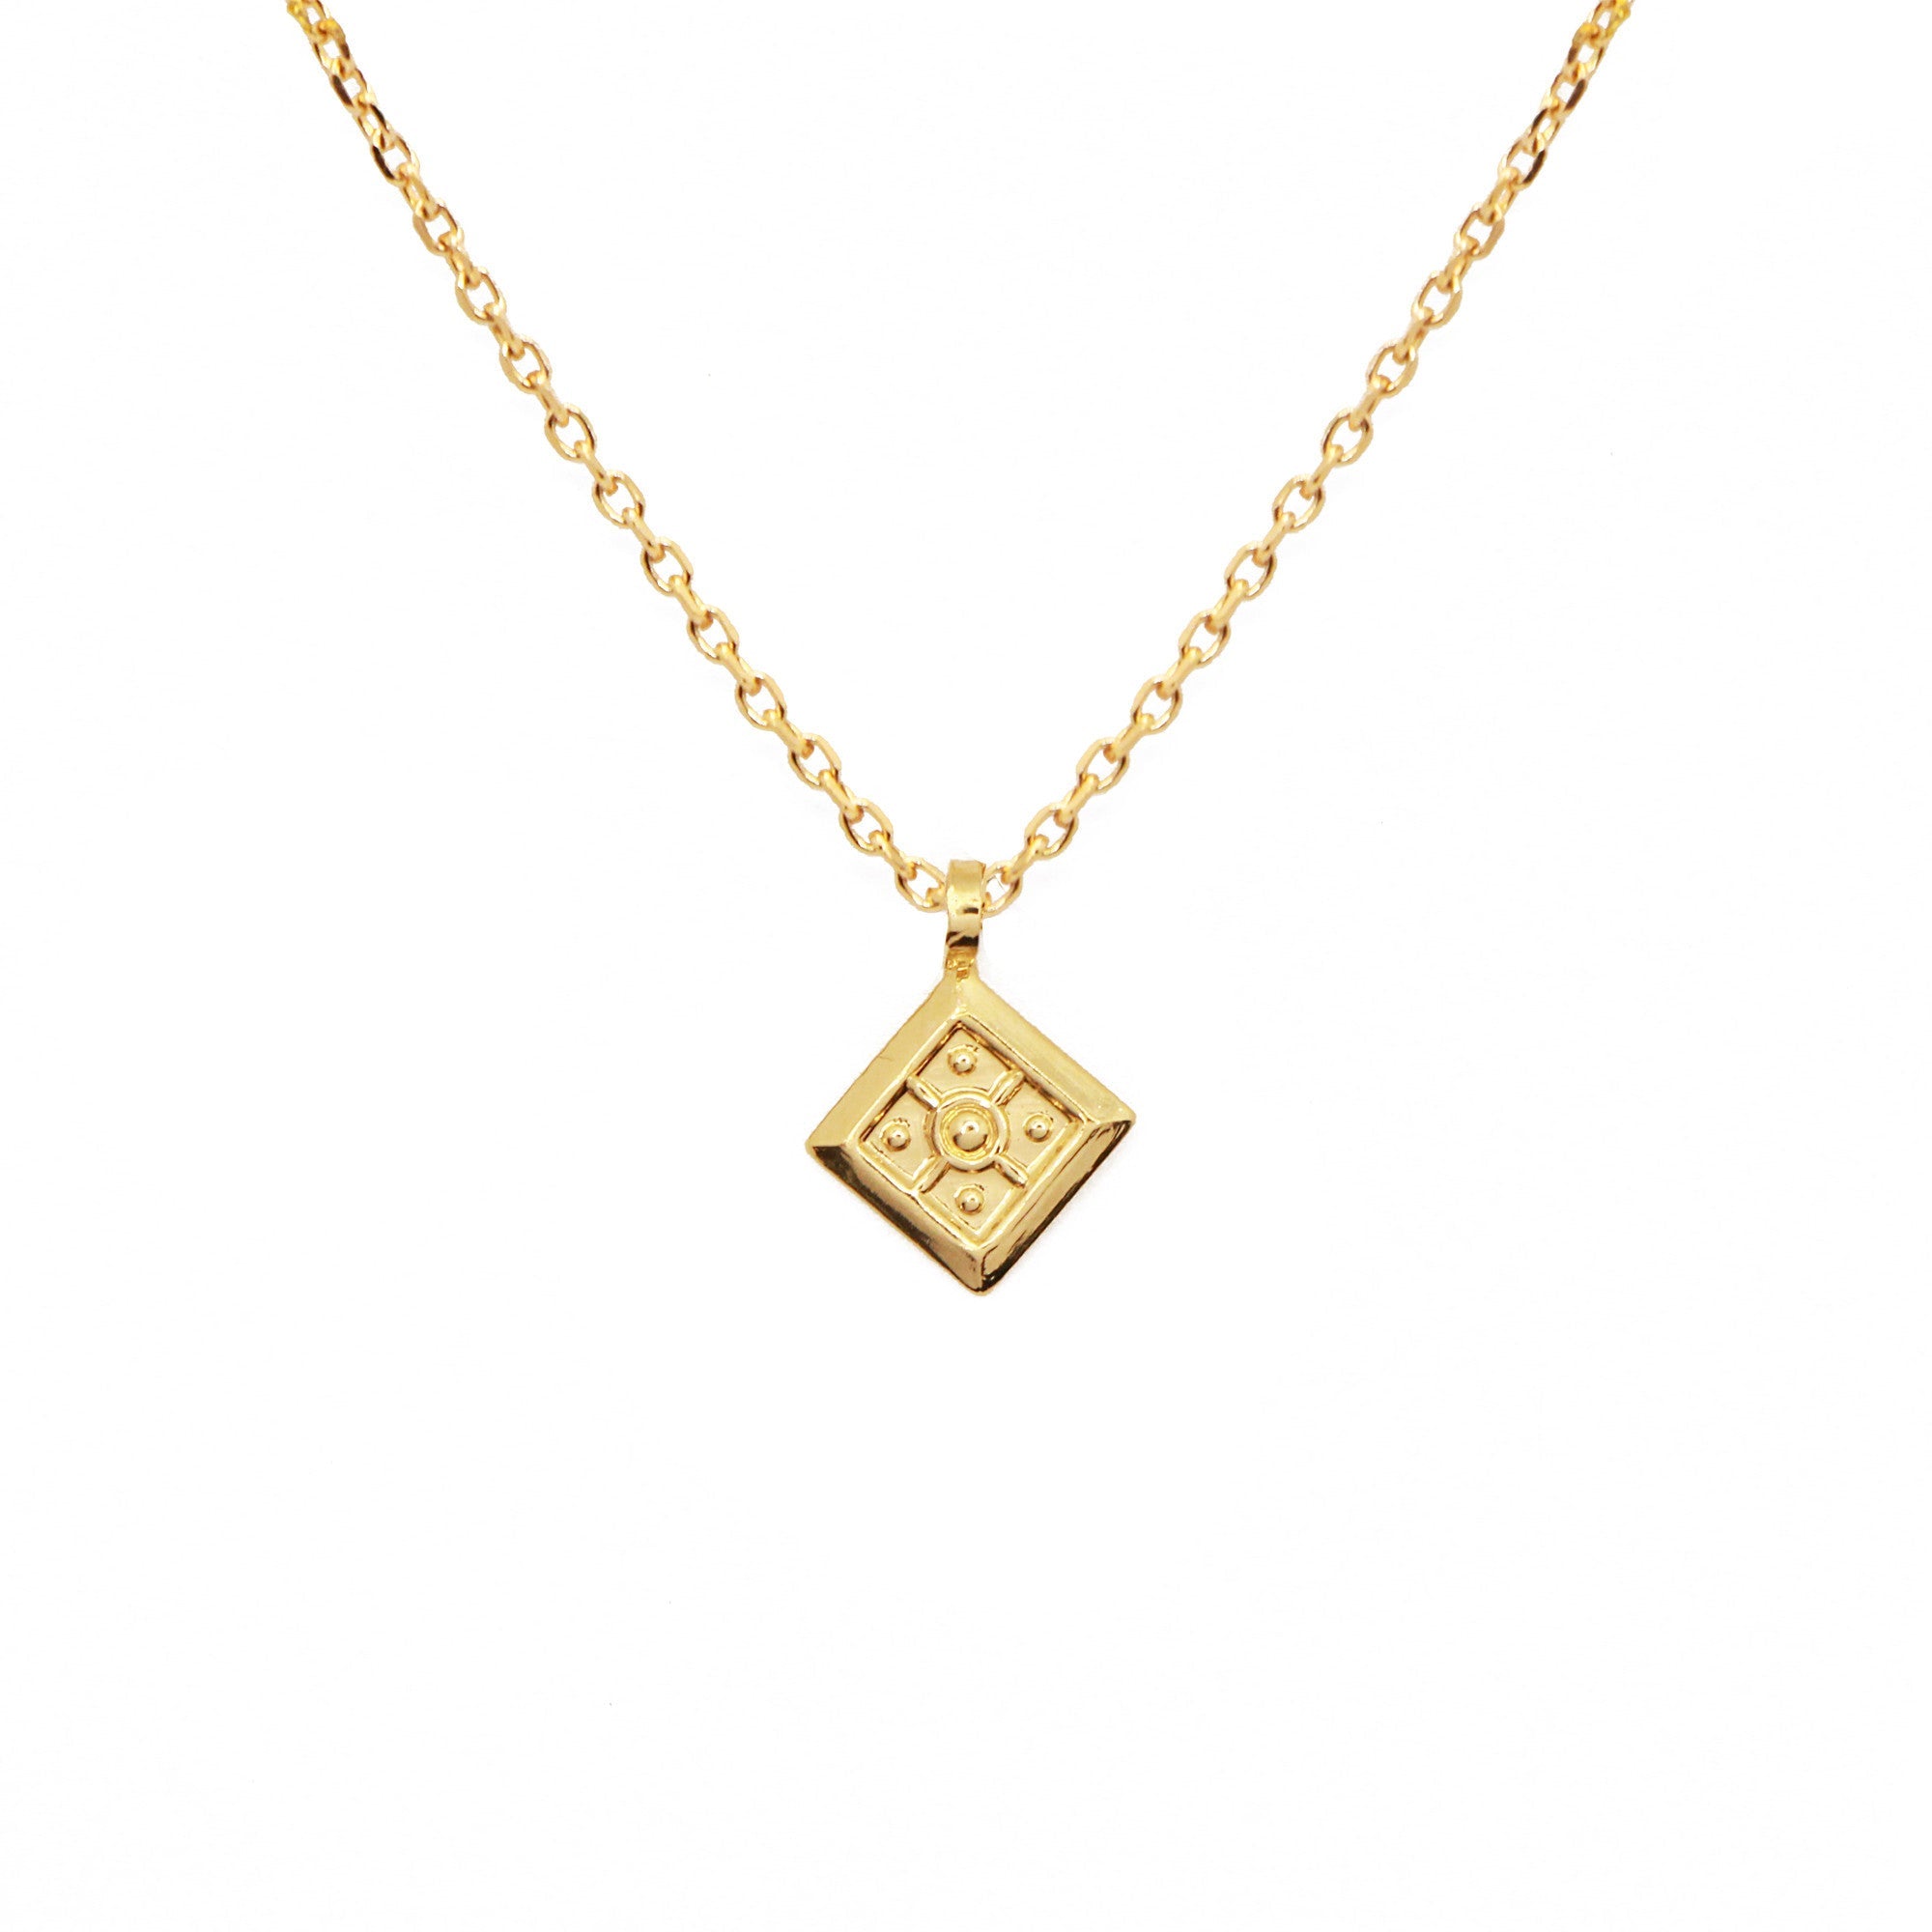 Square charm chain necklace